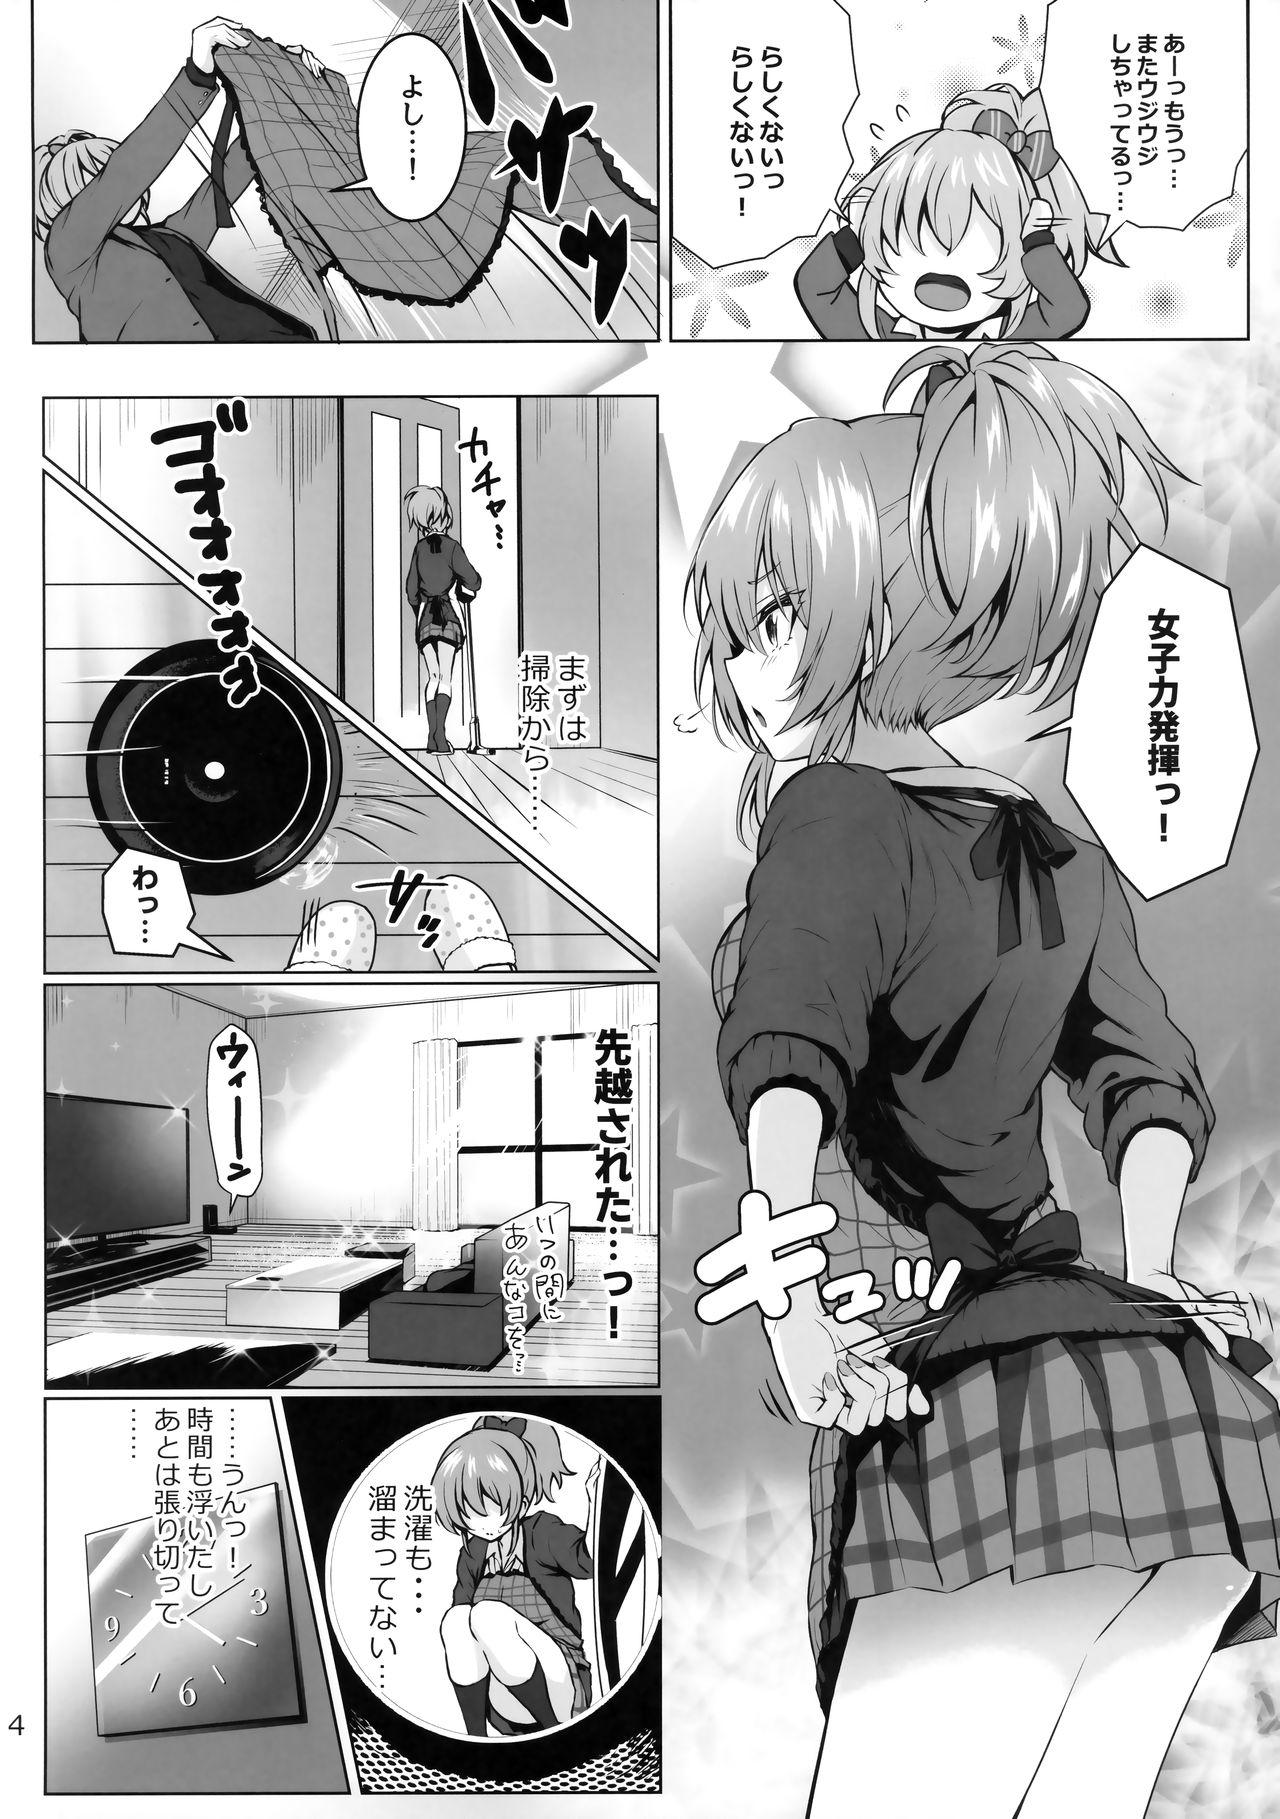 Ffm Mika and P++ - The idolmaster Groping - Page 3